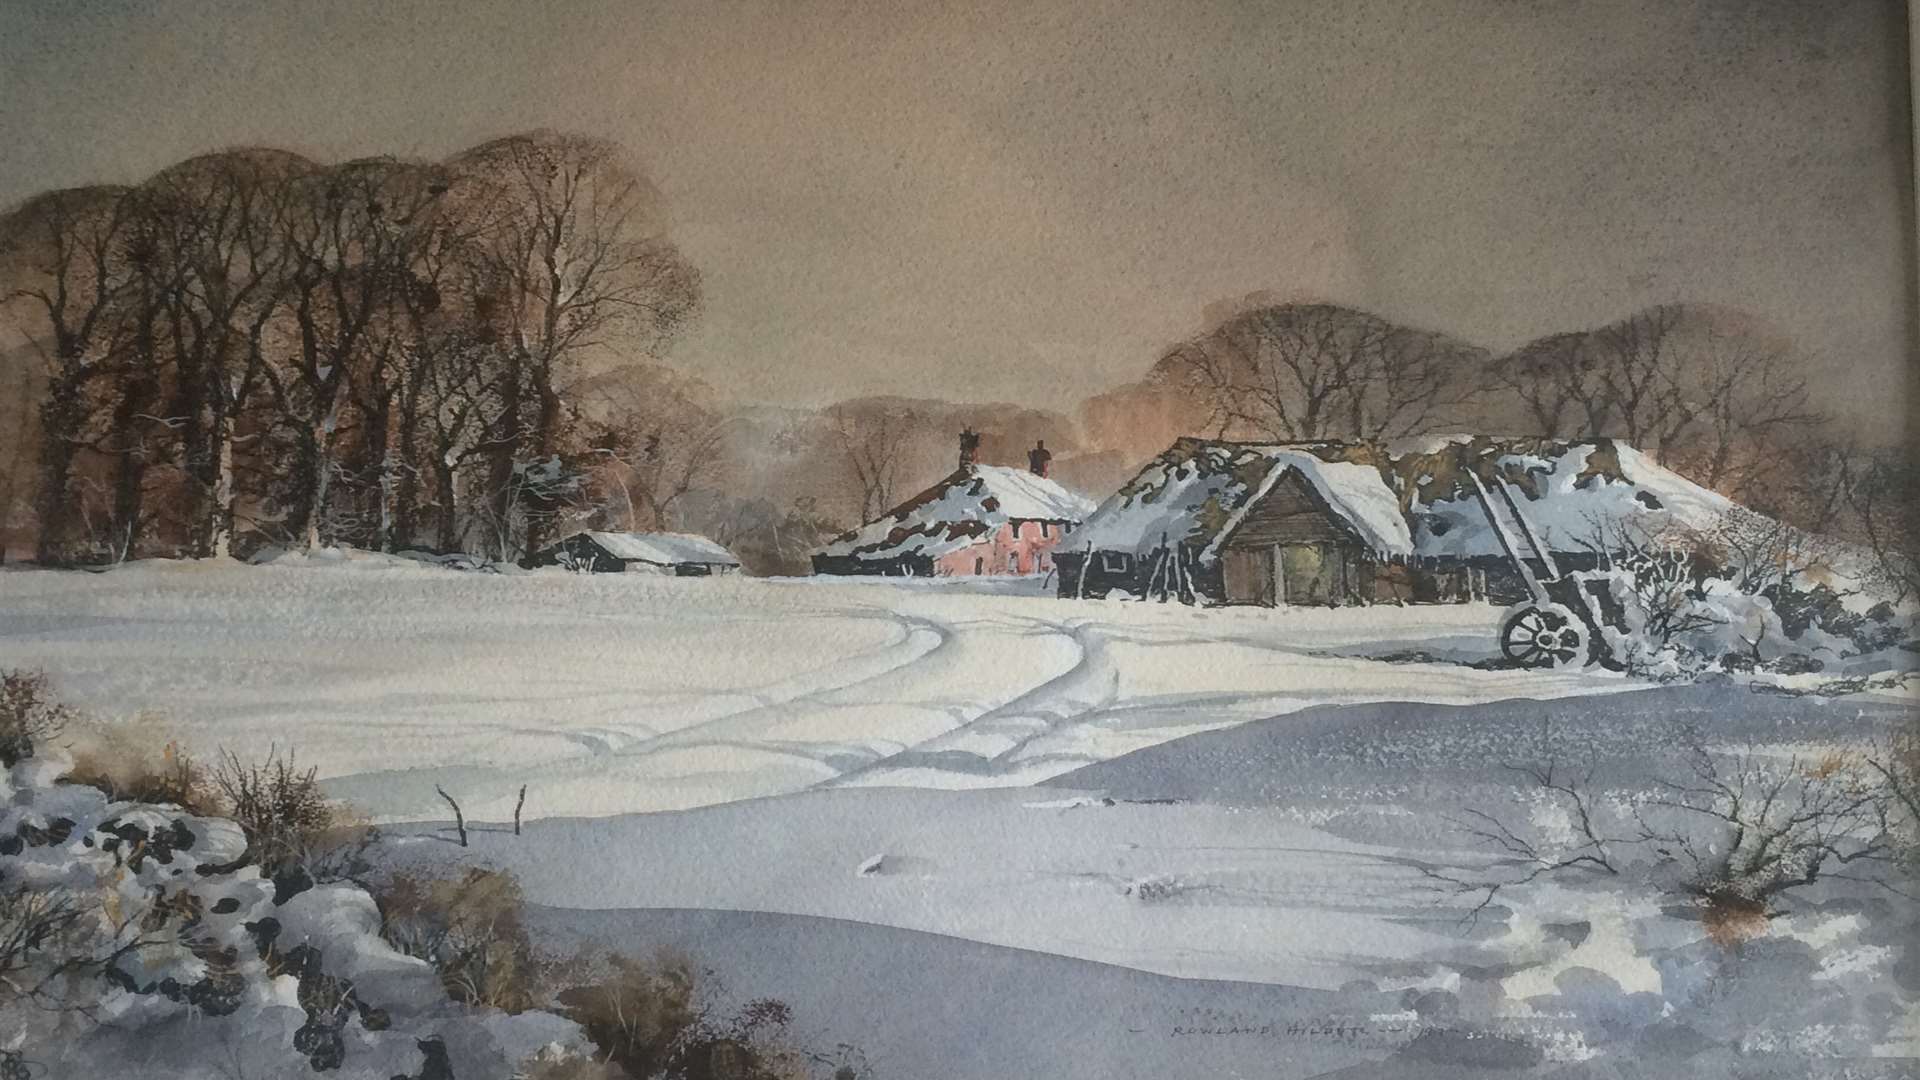 First Snow by Rowland Hilder - part of the exhibition at the dockyard